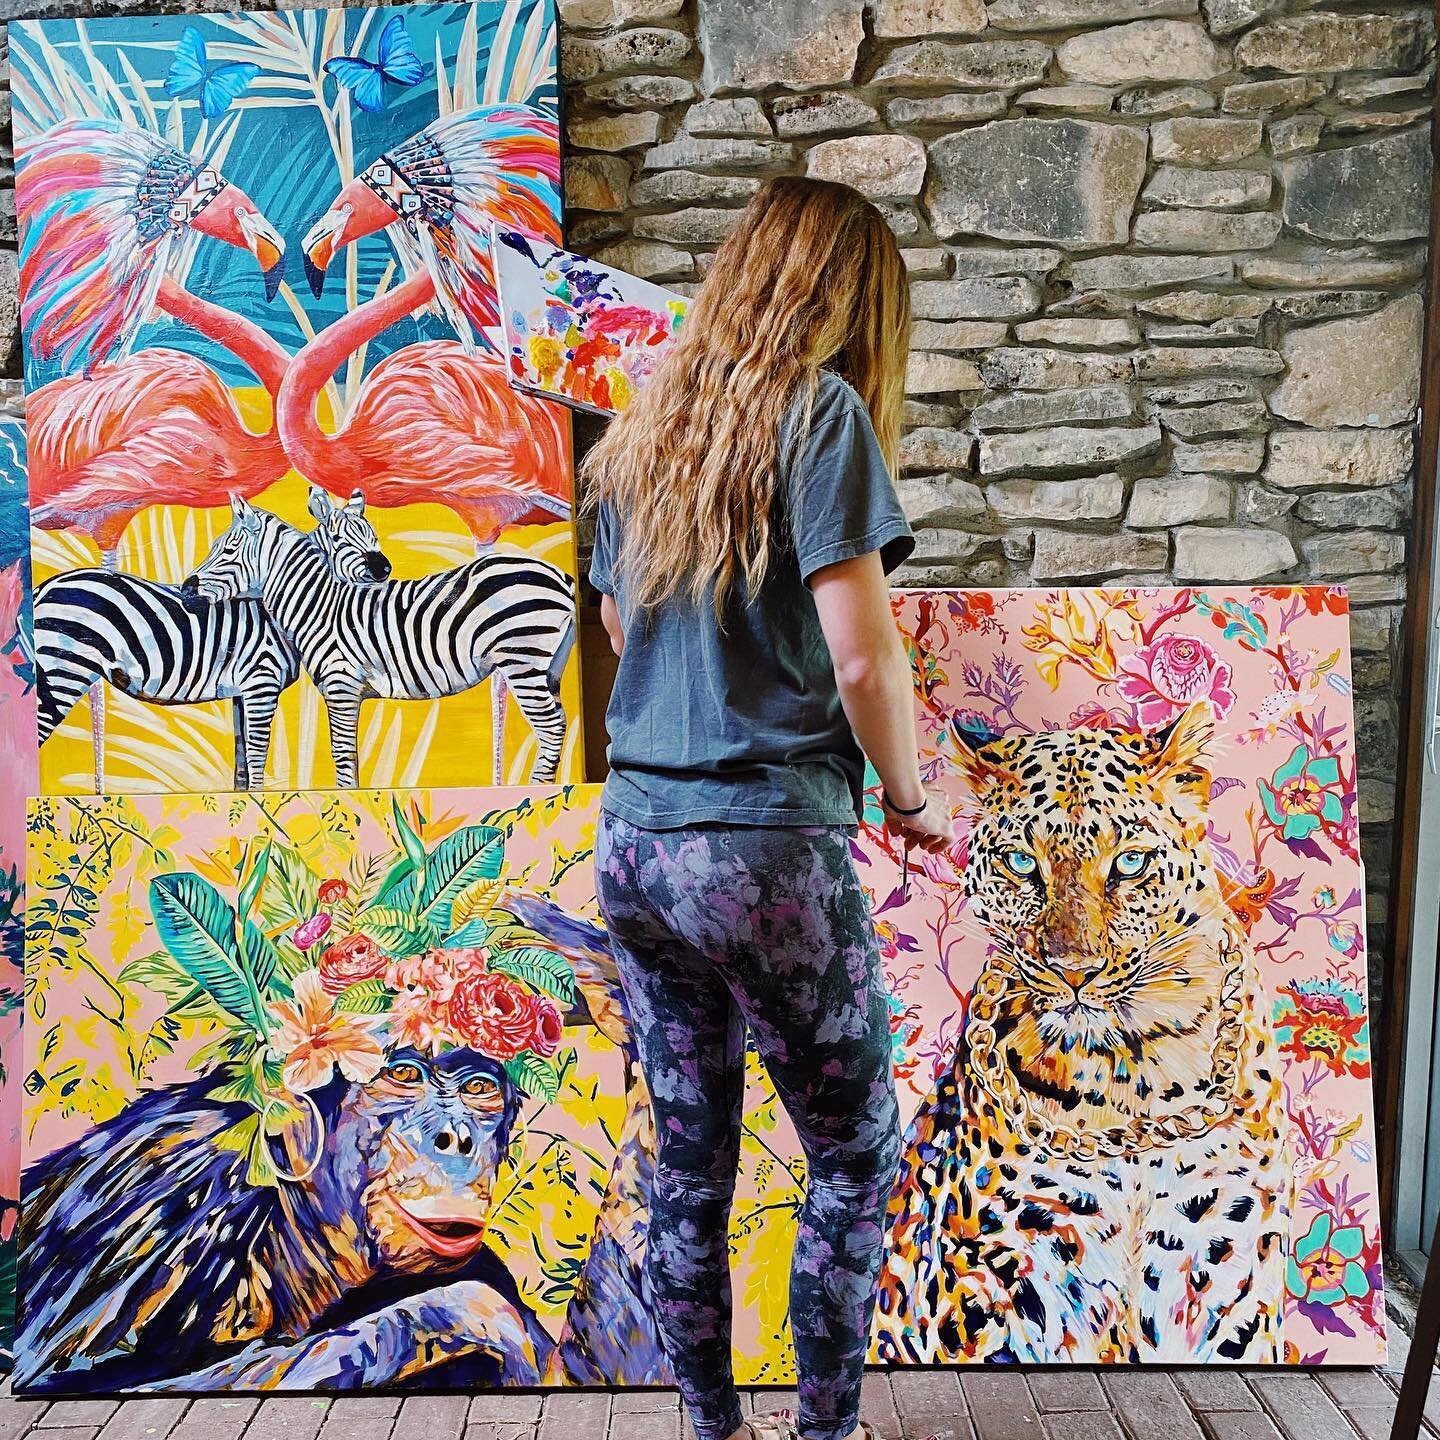 Working on a new series, who should I paint next? 🦒🐅🐘🐍 comment your ideas below! 🎨👩&zwj;🎨 🙏🏼💛Feeling some kind of blue wallpaper vibes for the next background. *Also currently obsessed with Gwen Stefani&rsquo;s song &ldquo;let me reintroduc